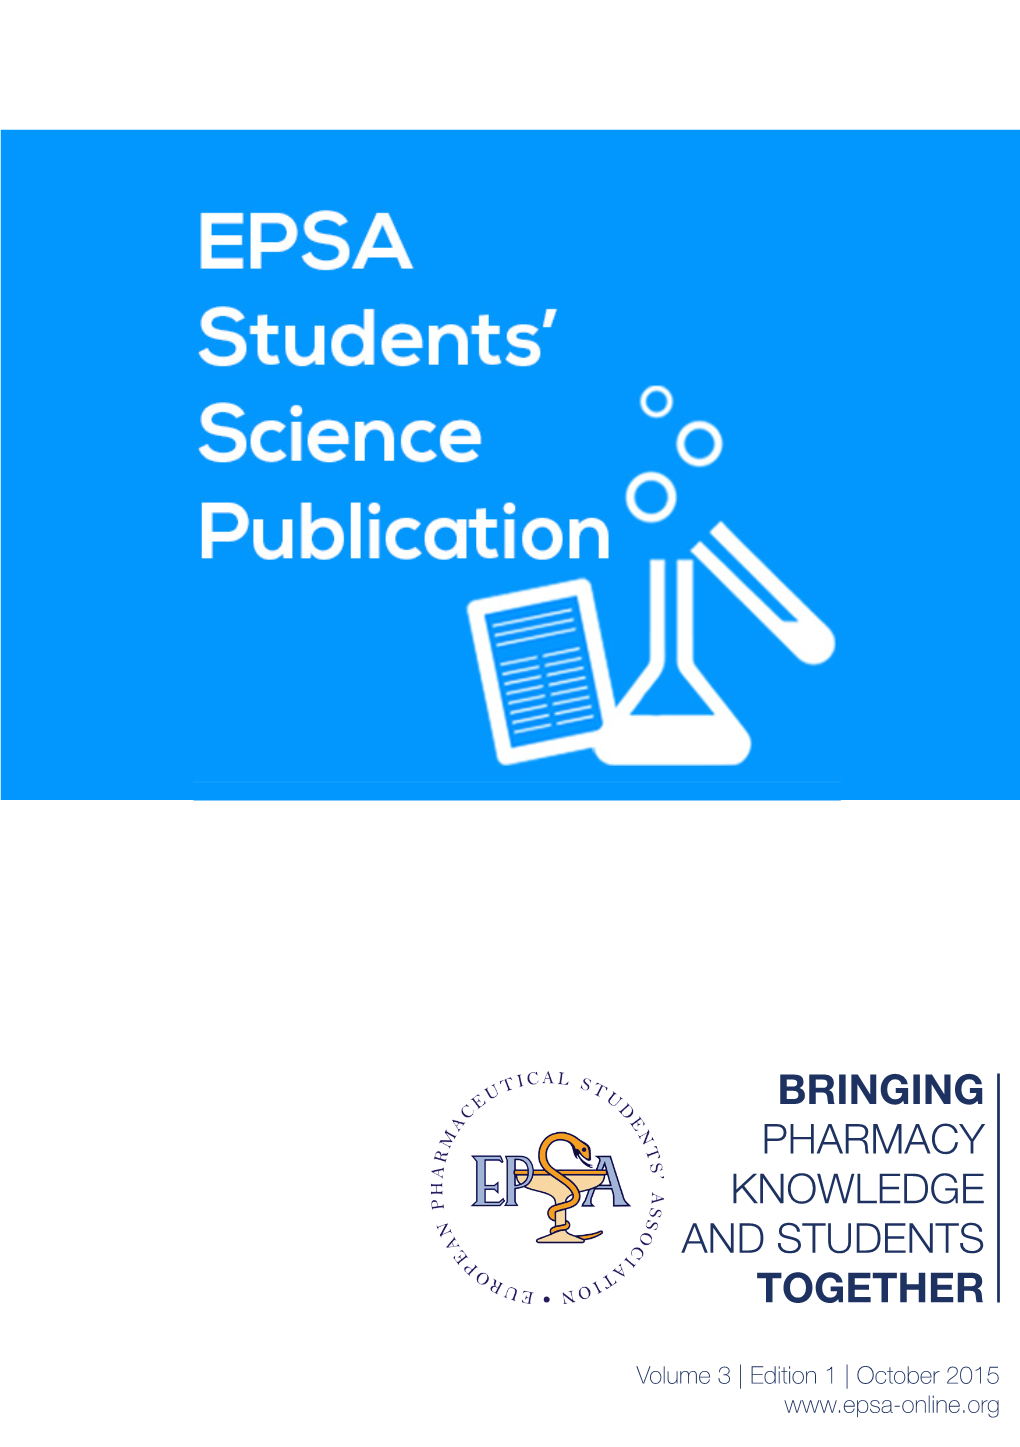 Bringing Pharmacy Knowledge and Students Together